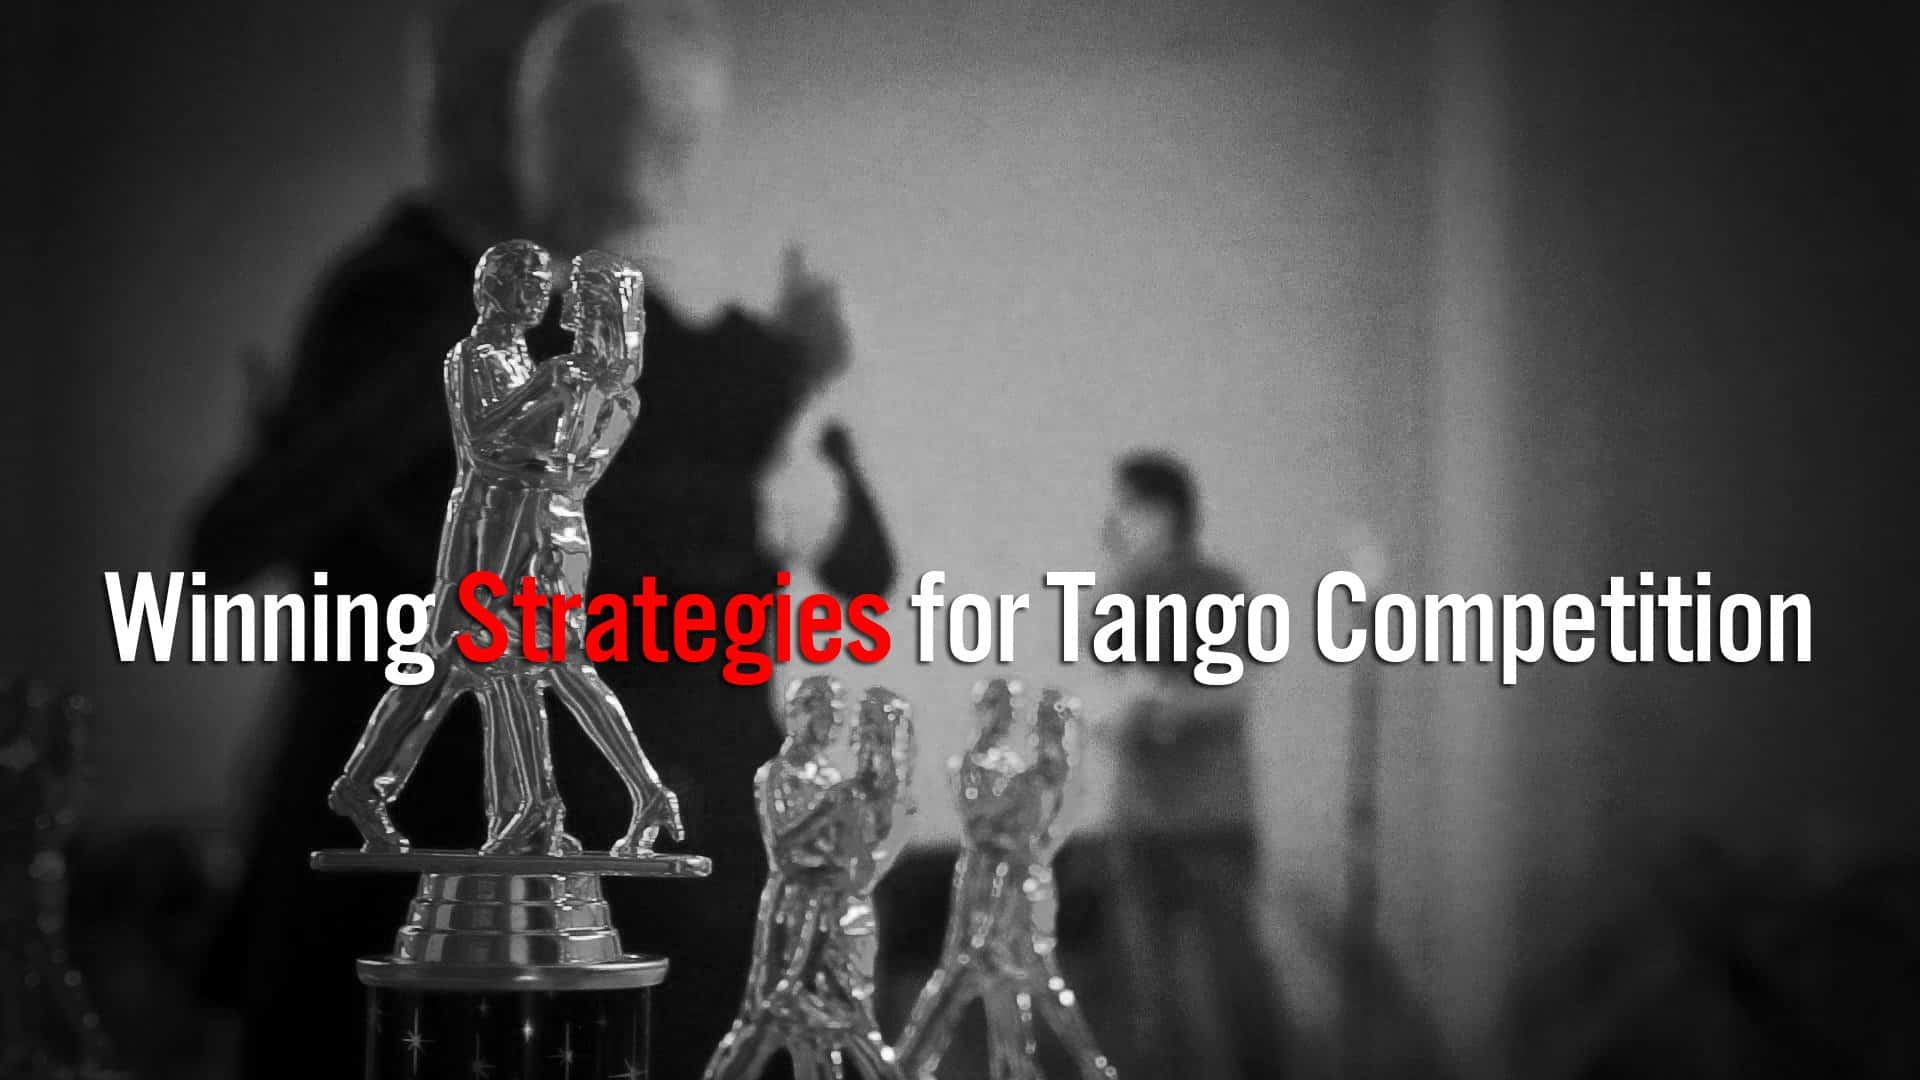 2017 SCTC Competition Guide: Part 4 – Winning Strategies for Tango Competition